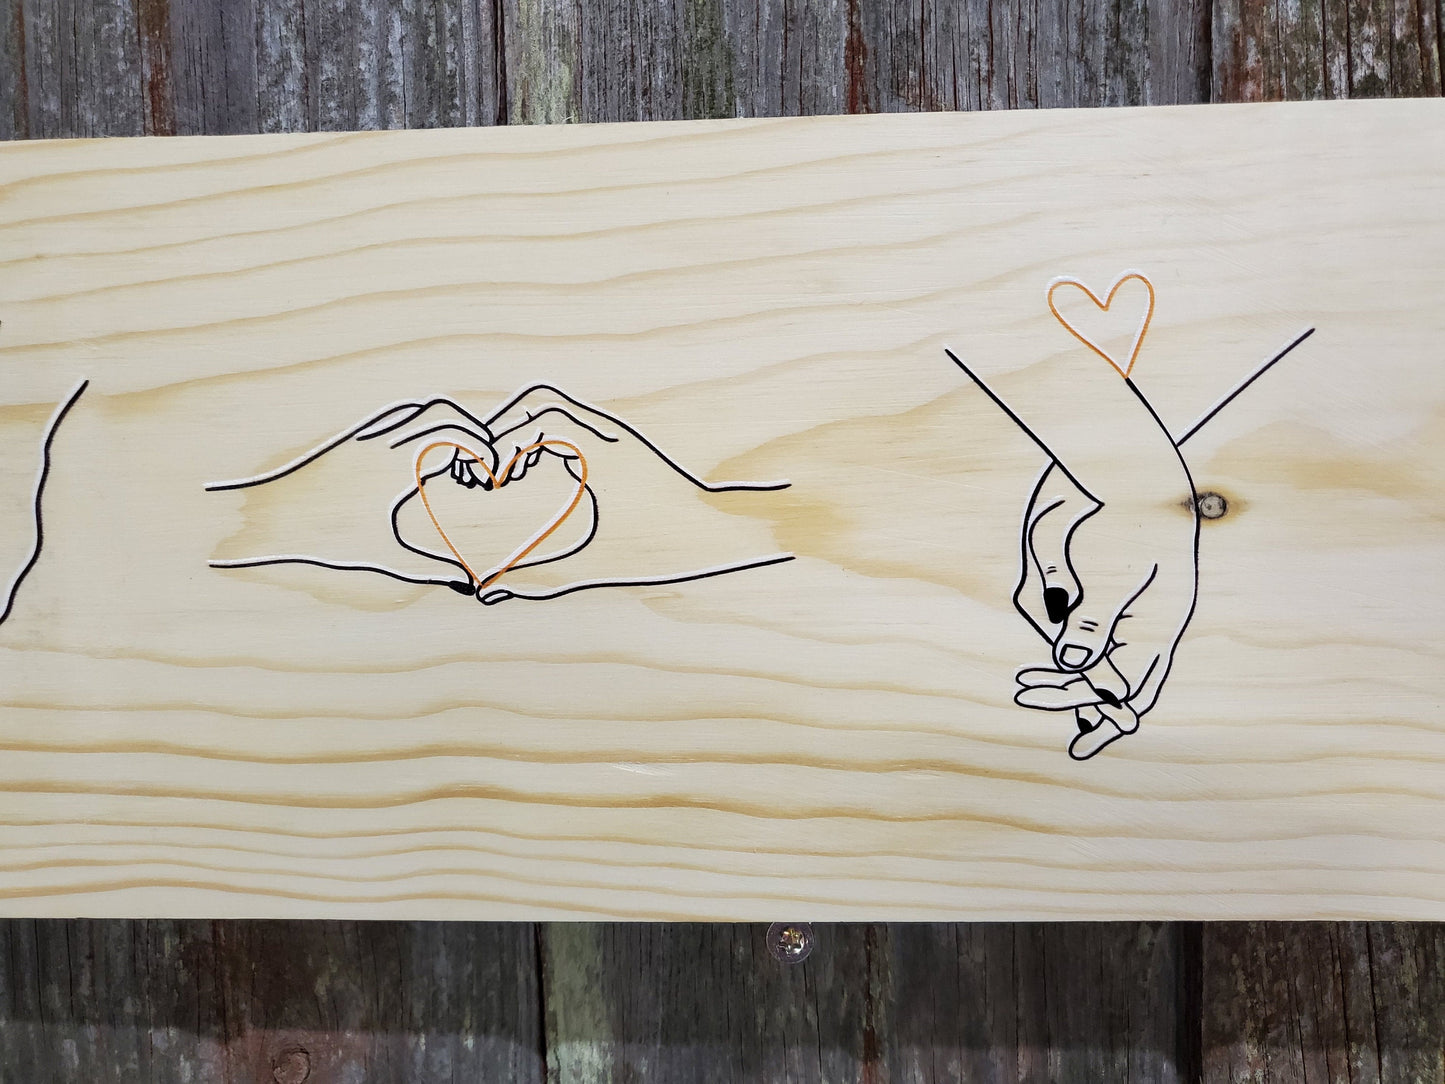 Holding Hands Wood Sign Spouse Loved One Hands String Together Love Heart Line Drawing Gift Colored Wood Print Gift for Wife Husband